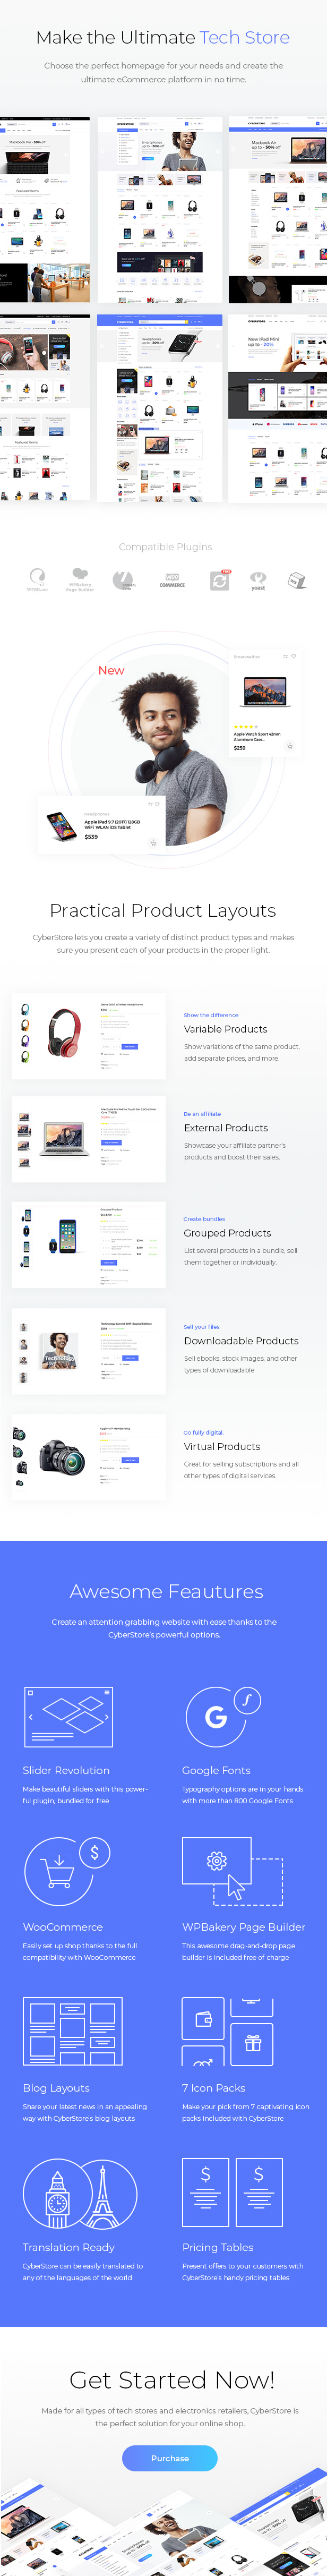 CyberStore - Simple eCommerce Shop - 1